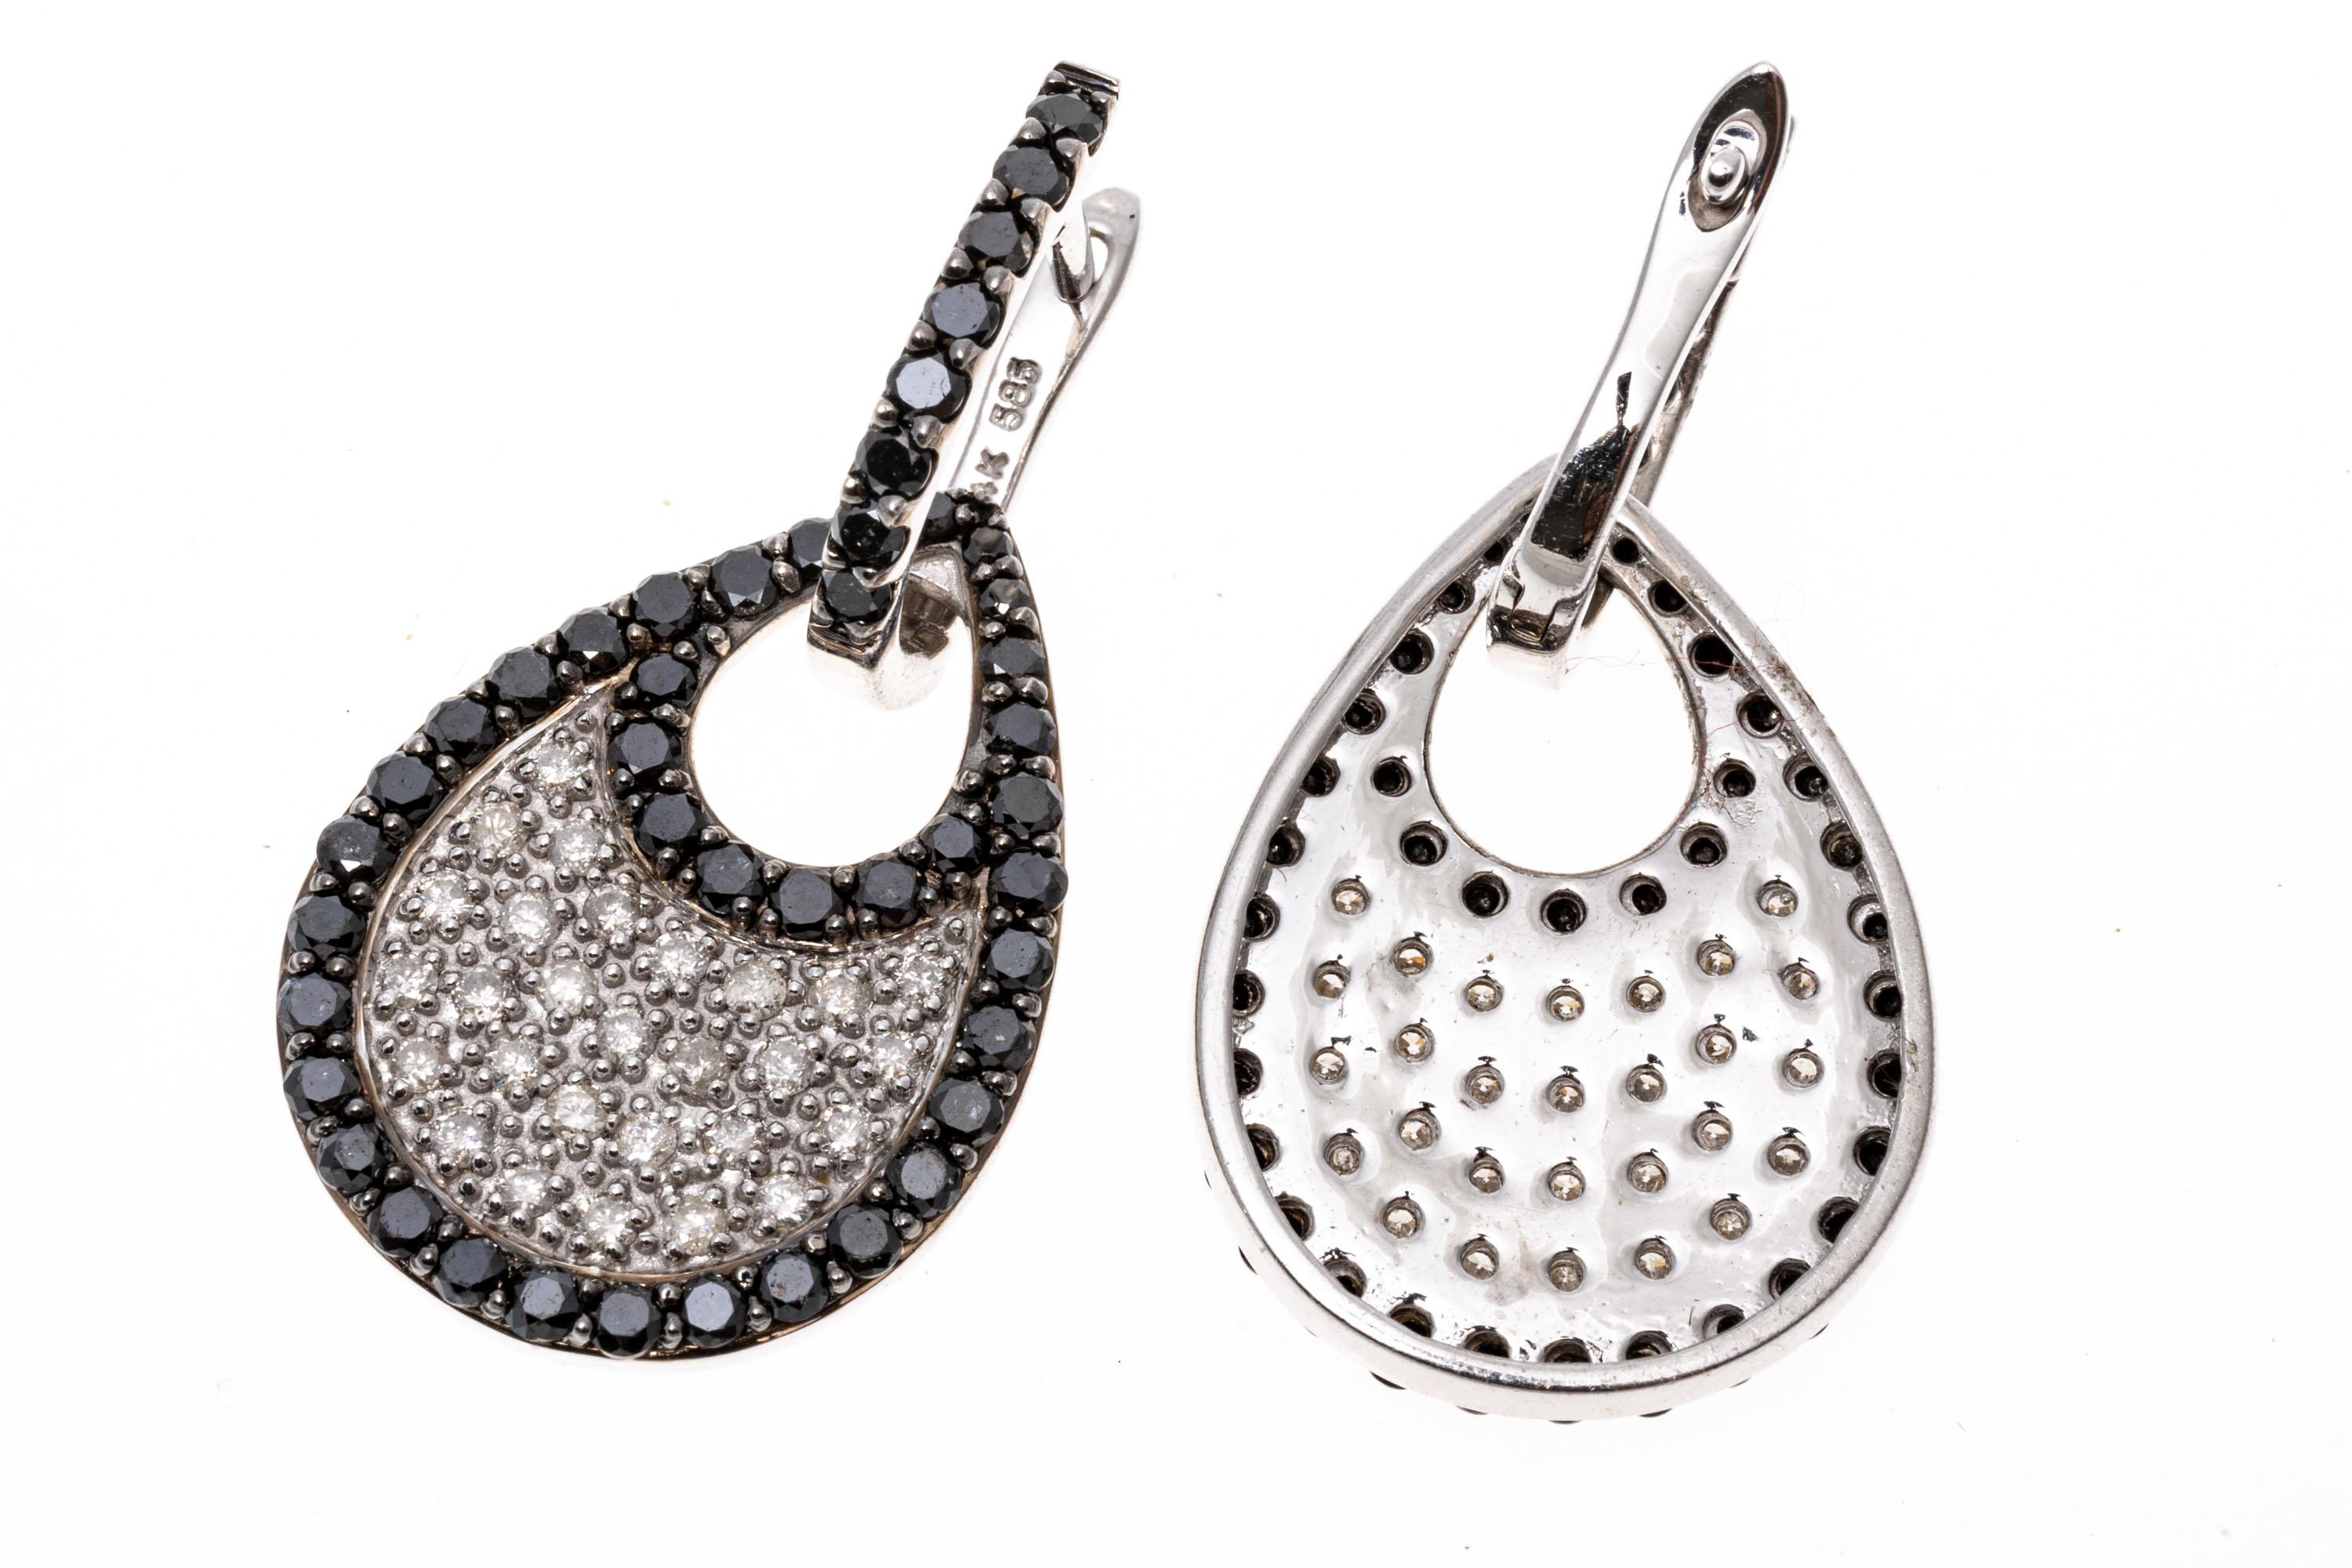 14k white gold earrings. These beautiful, versatile earrings contain a small hoop top, set with a row of round faceted, black diamonds. Suspended from the hoop is a pear shaped pendant, pave set in the center with round faceted, white diamonds,